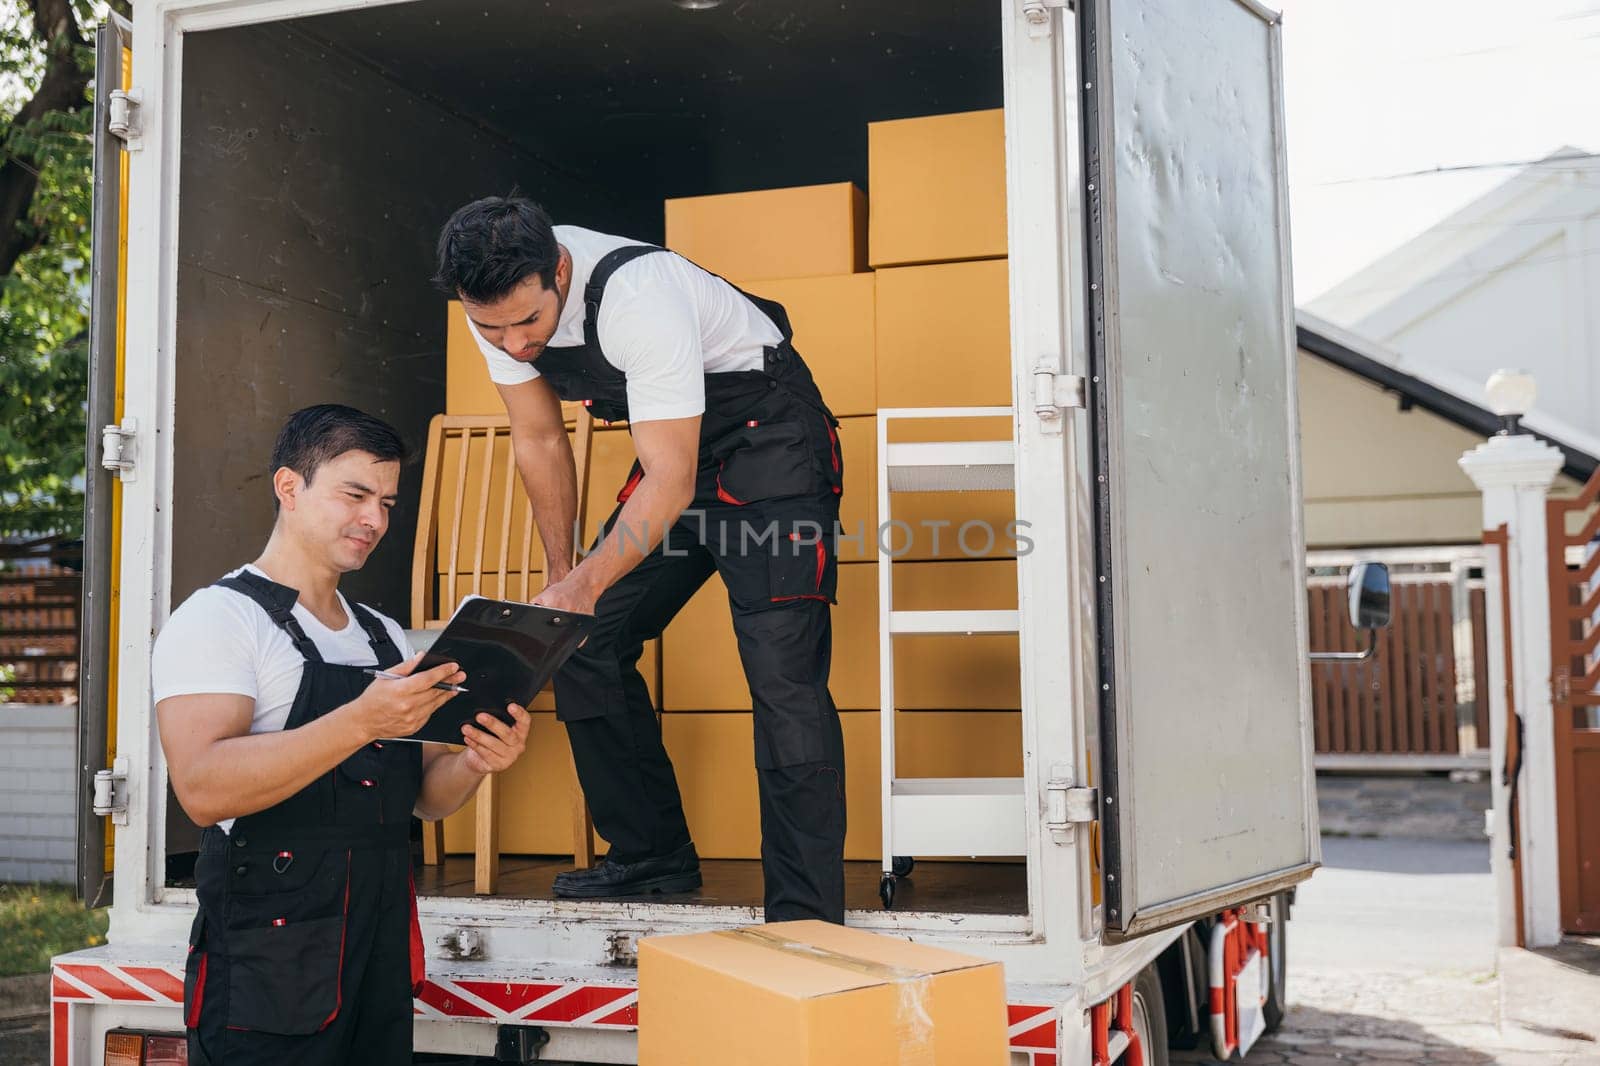 Uniformed workers unload cardboard boxes checking checklist with a clipboard at the truck. Reliable movers guarantee efficient moving and professional service. Moving day concept by Sorapop